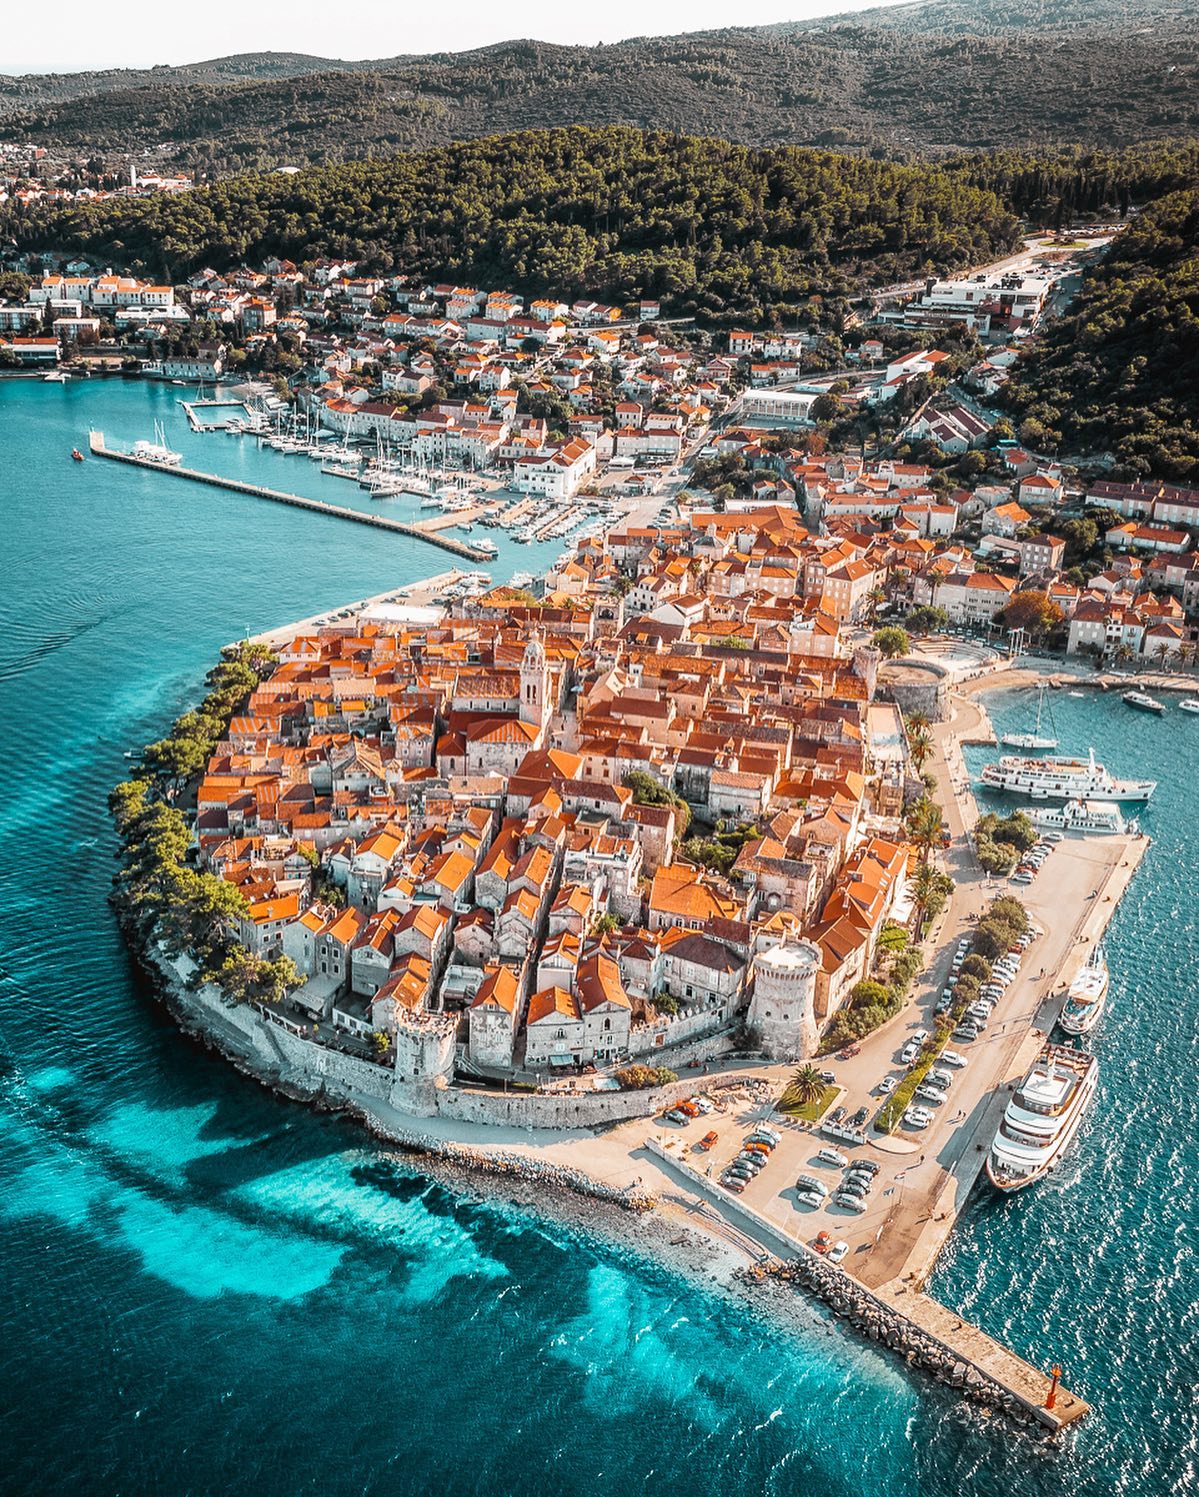 Korcula Town, one of the most instagrammable places in Croatia